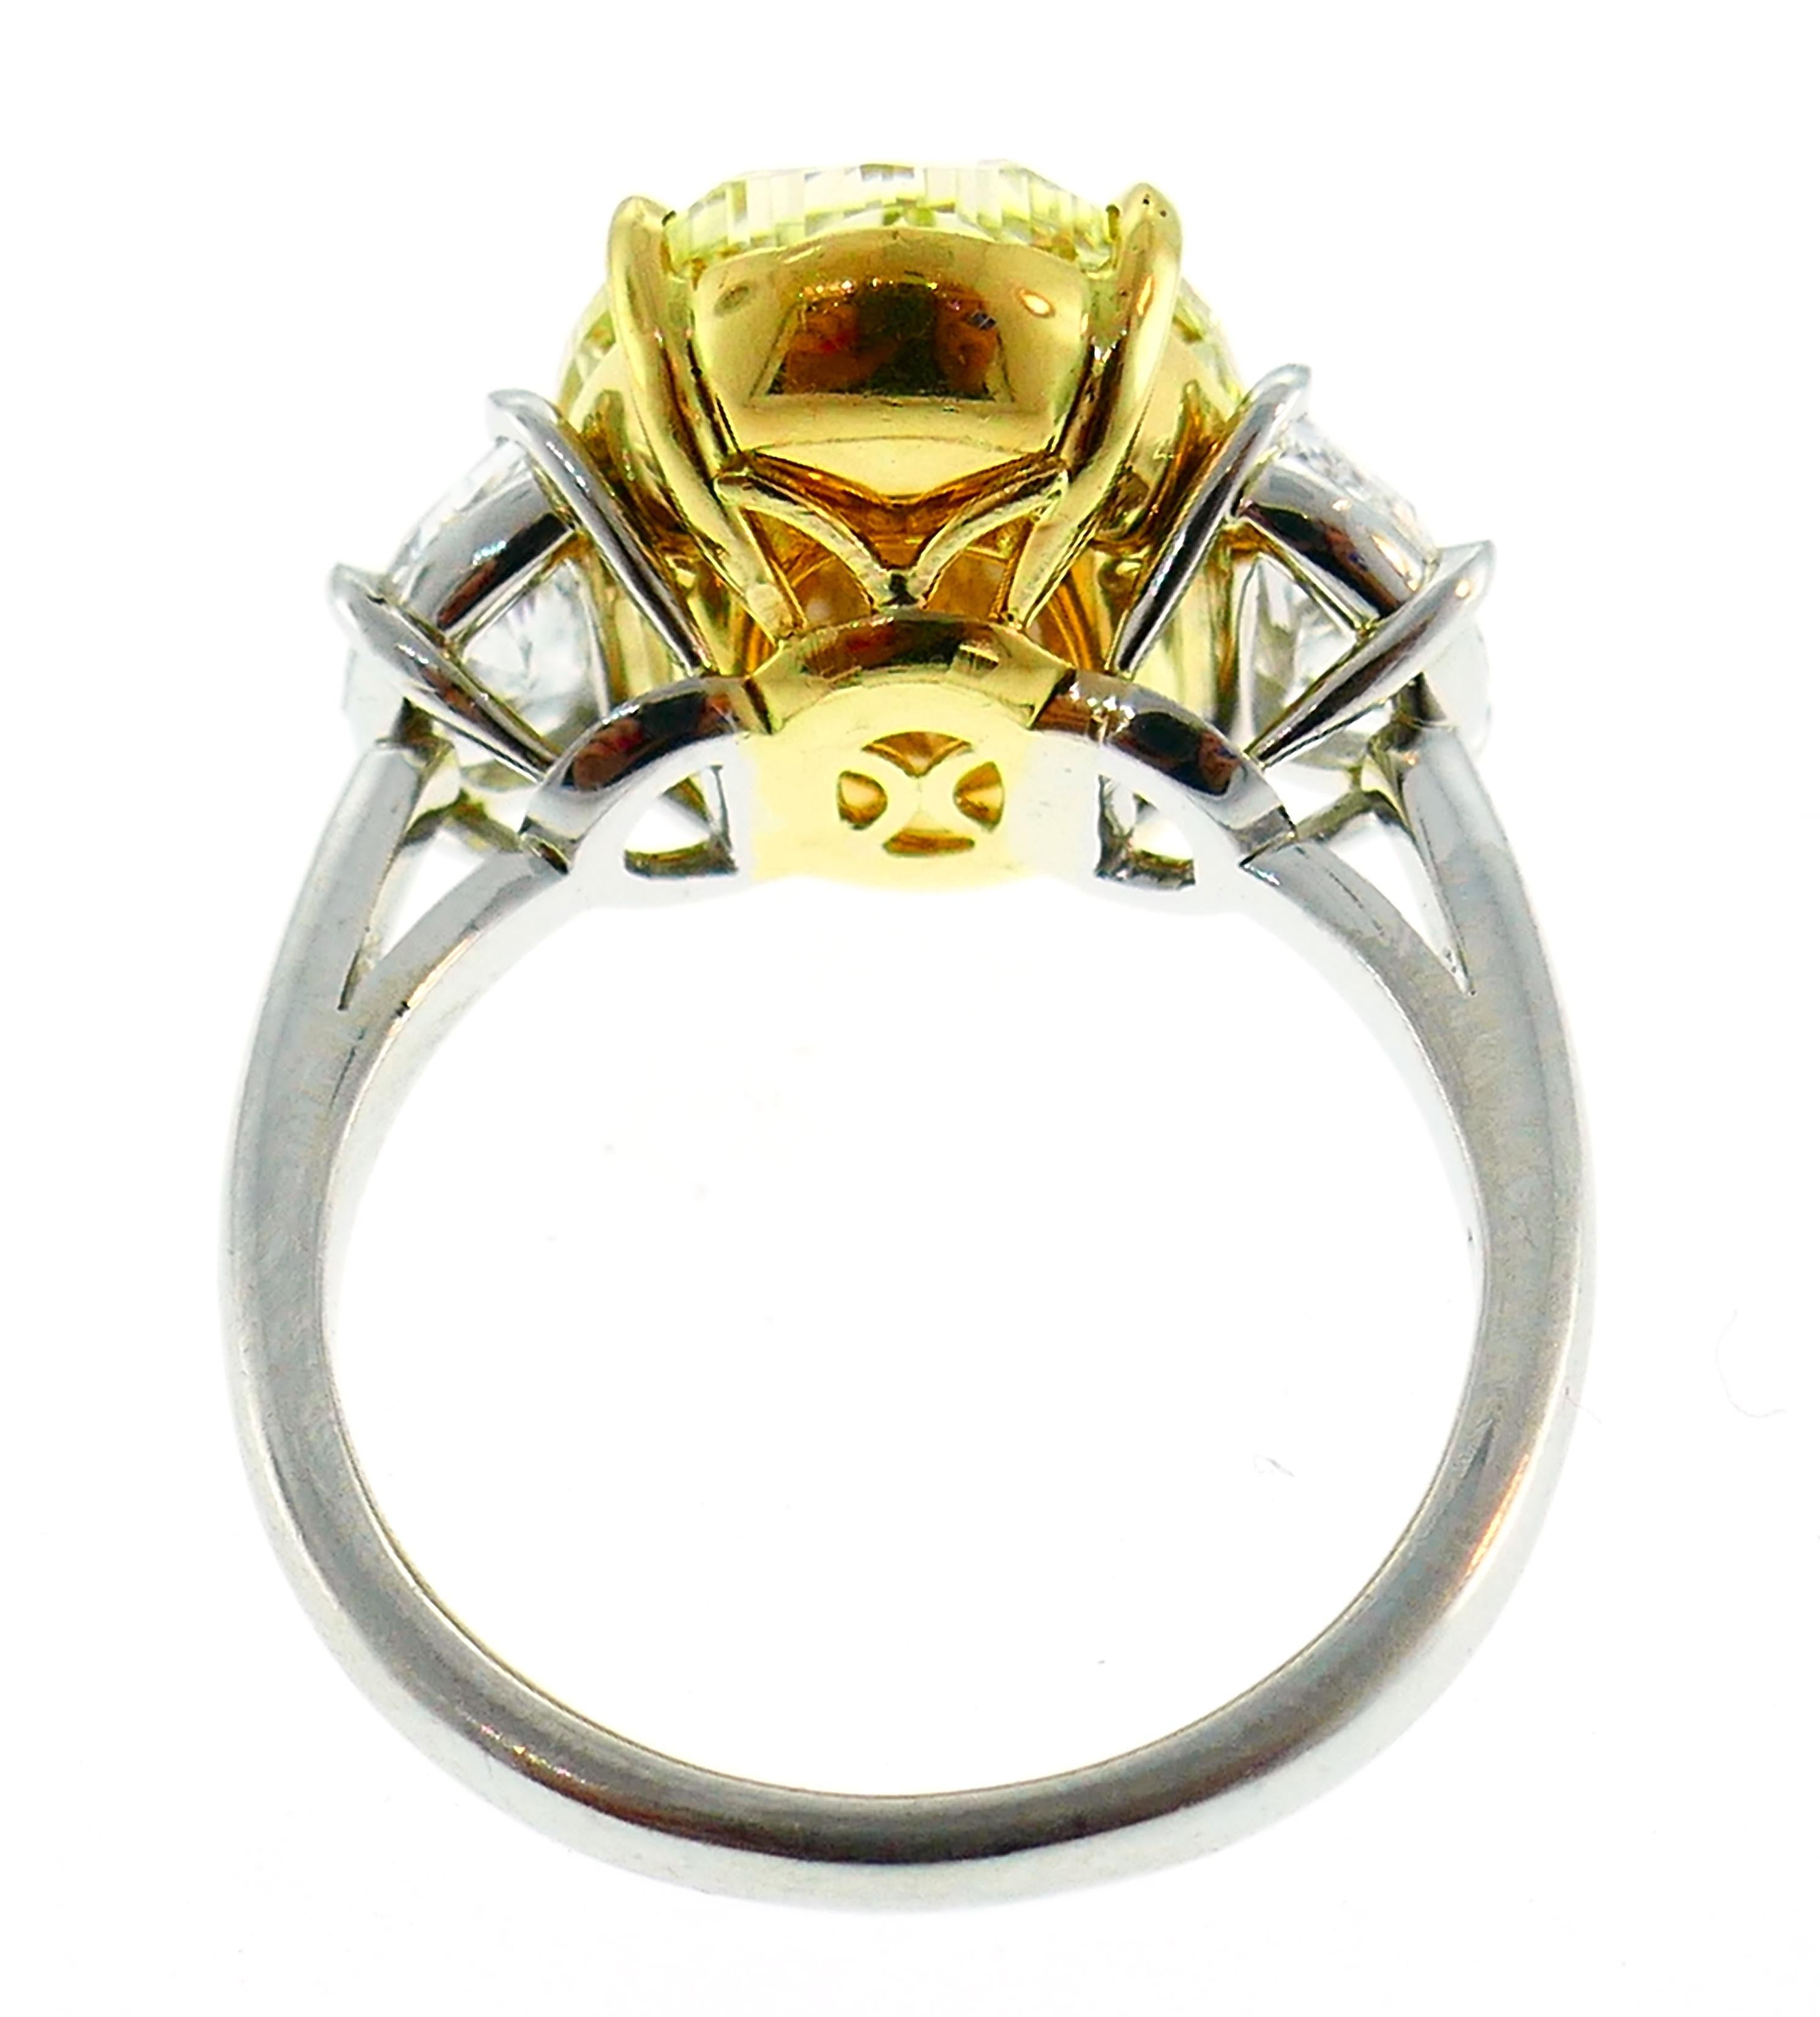 8.47 Carat Fancy Yellow Diamond GIA Platinum Ring Solitaire For Sale 2